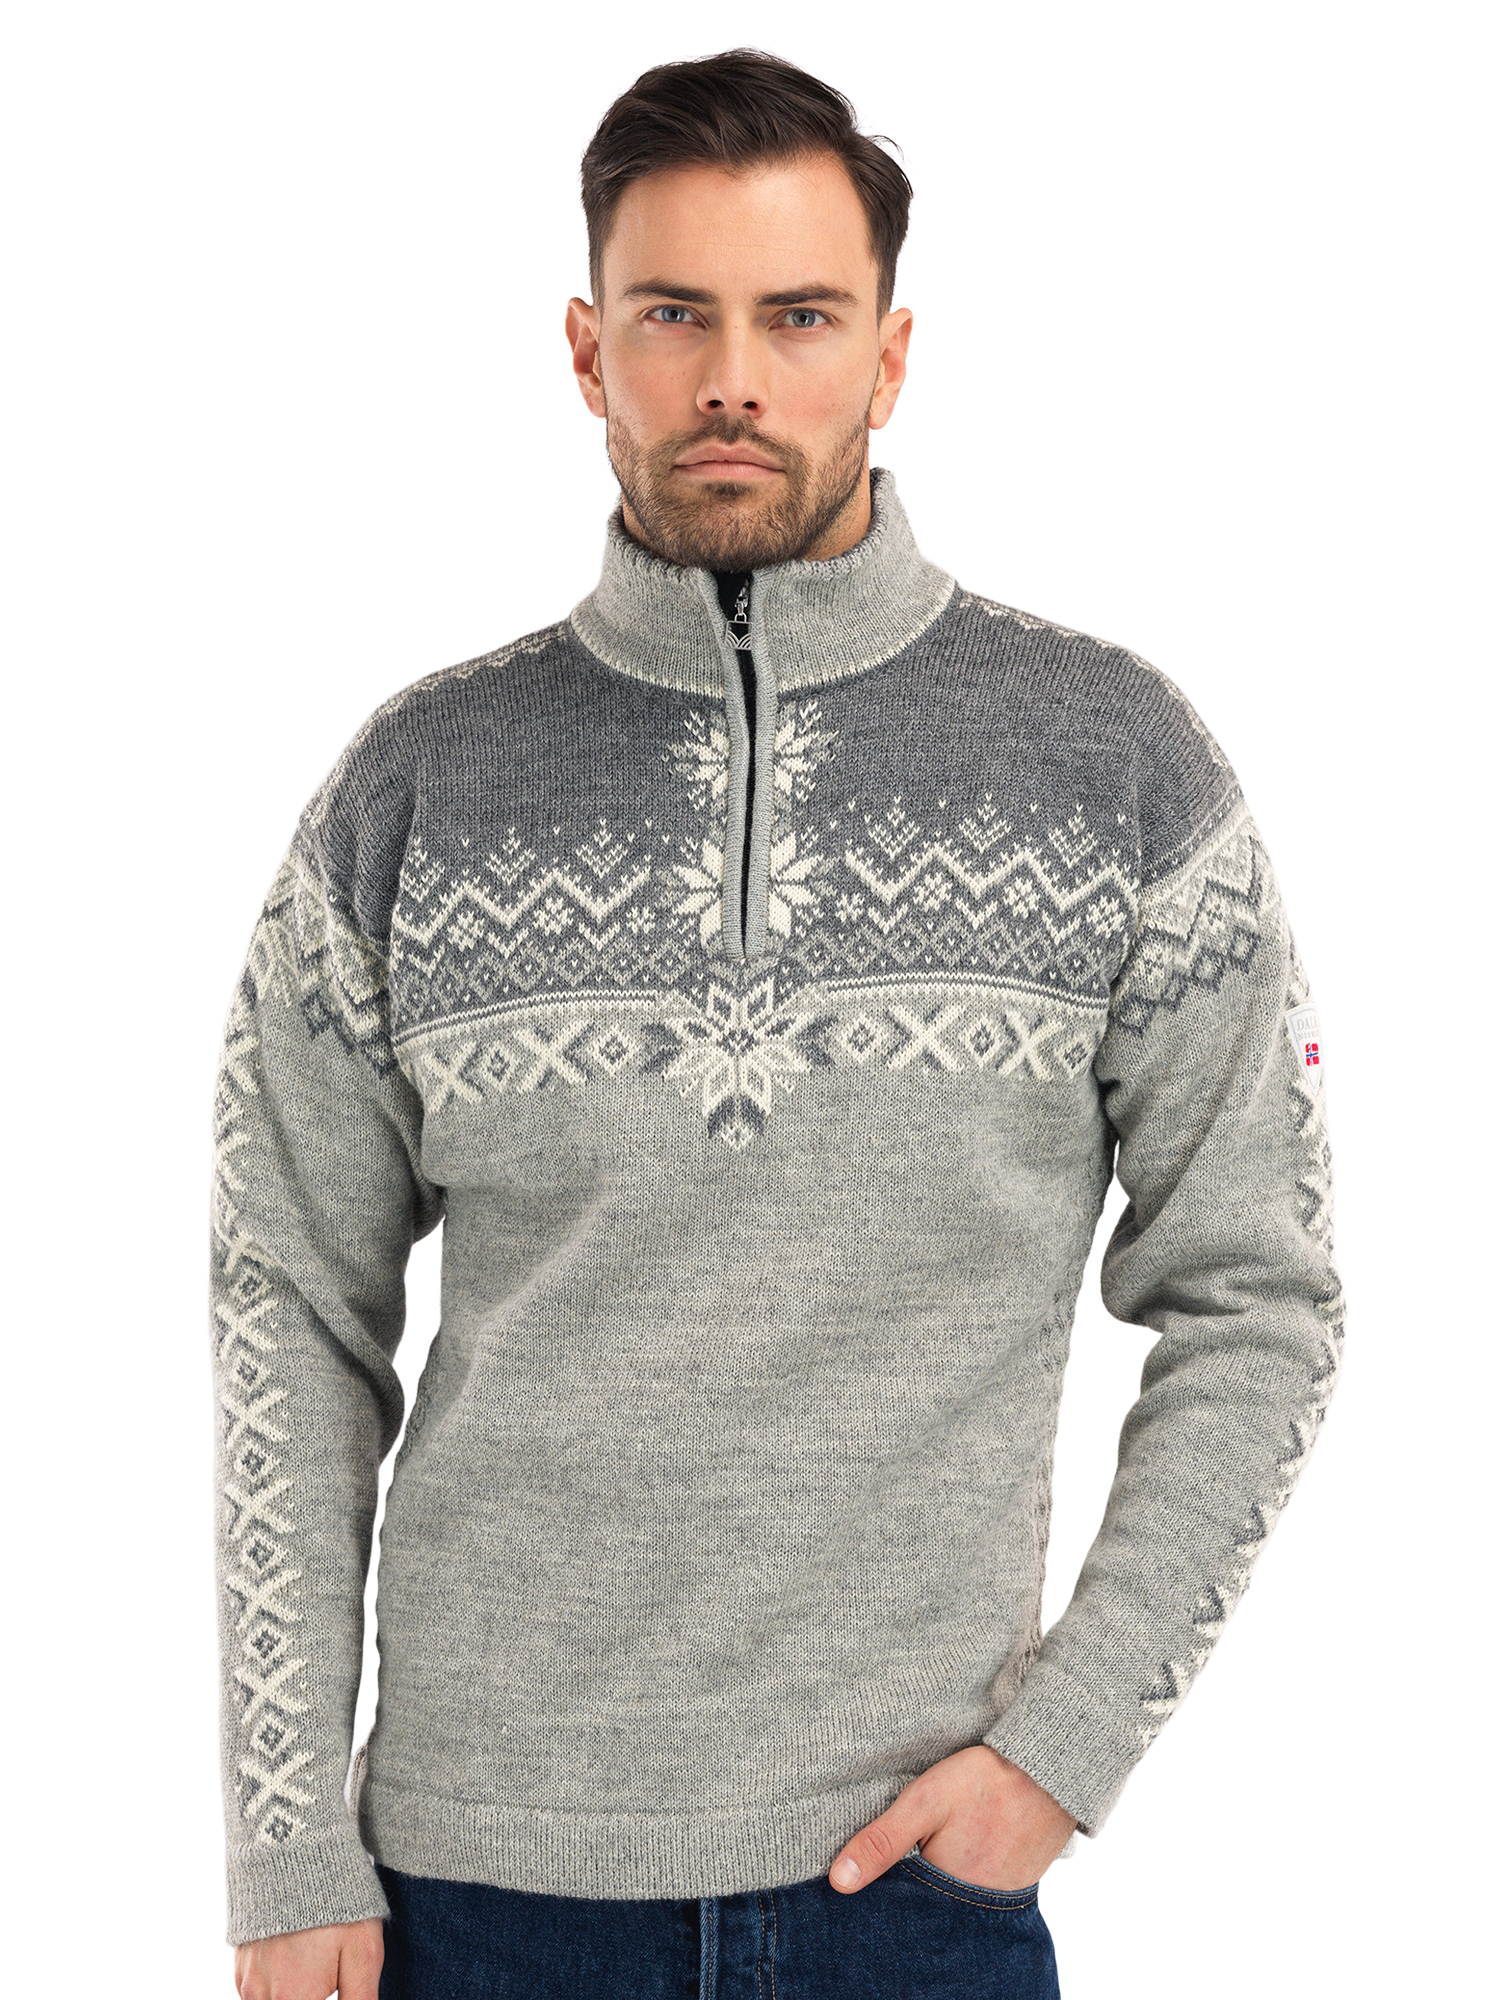 140th Anniversary Sweater - Men - Grey - Dale of Norway - Dale of